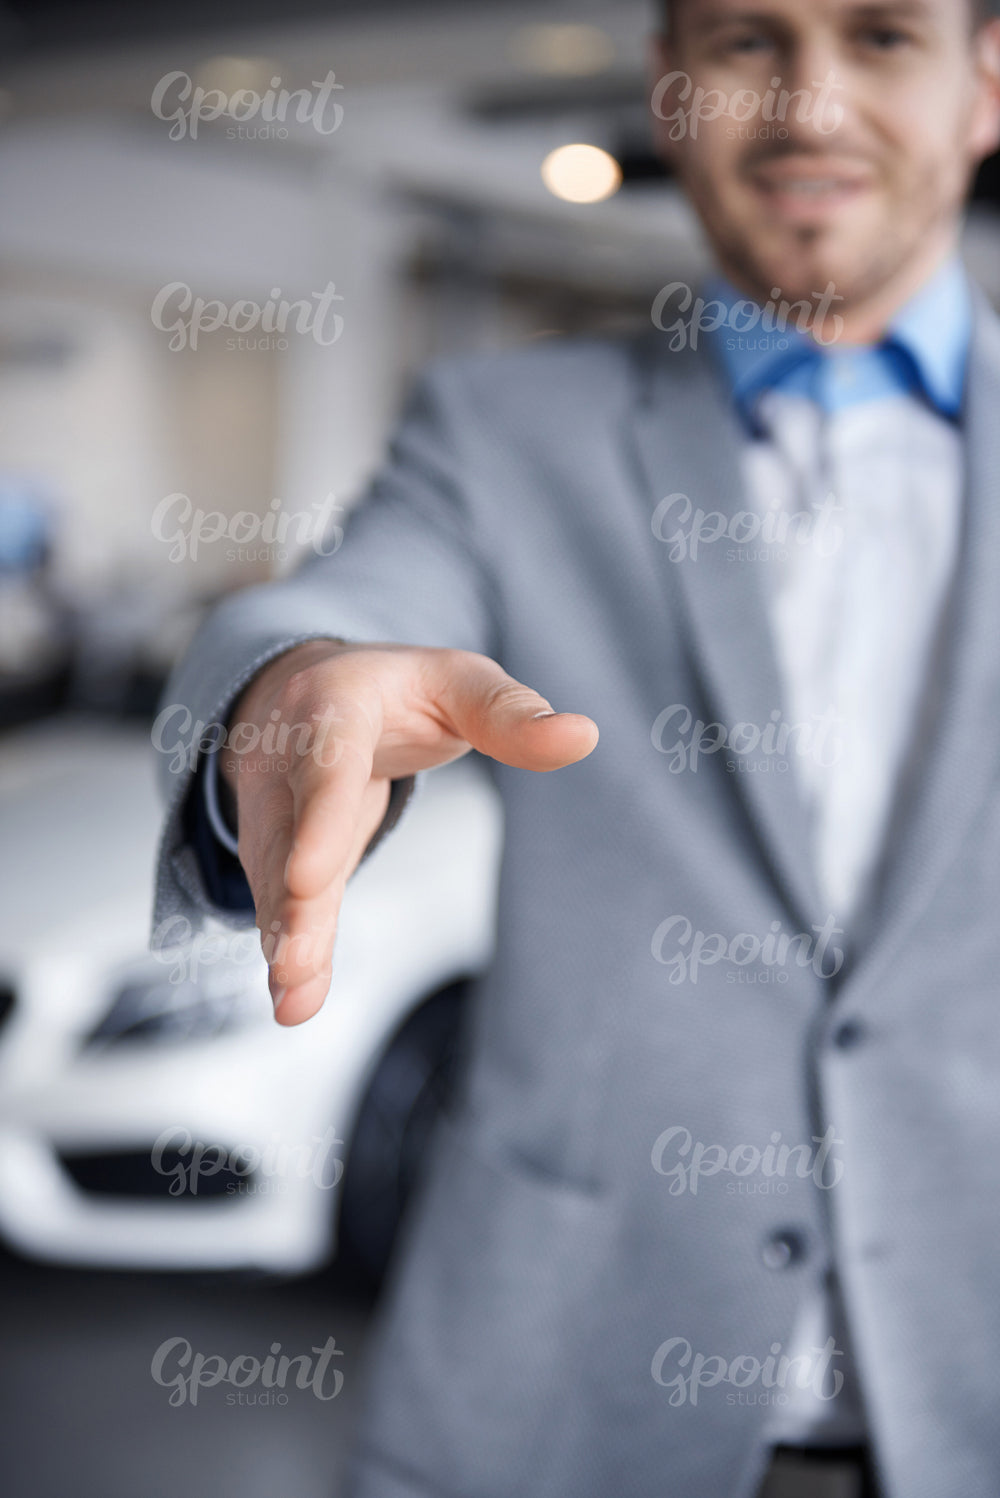 Car dealer reaching out his hand